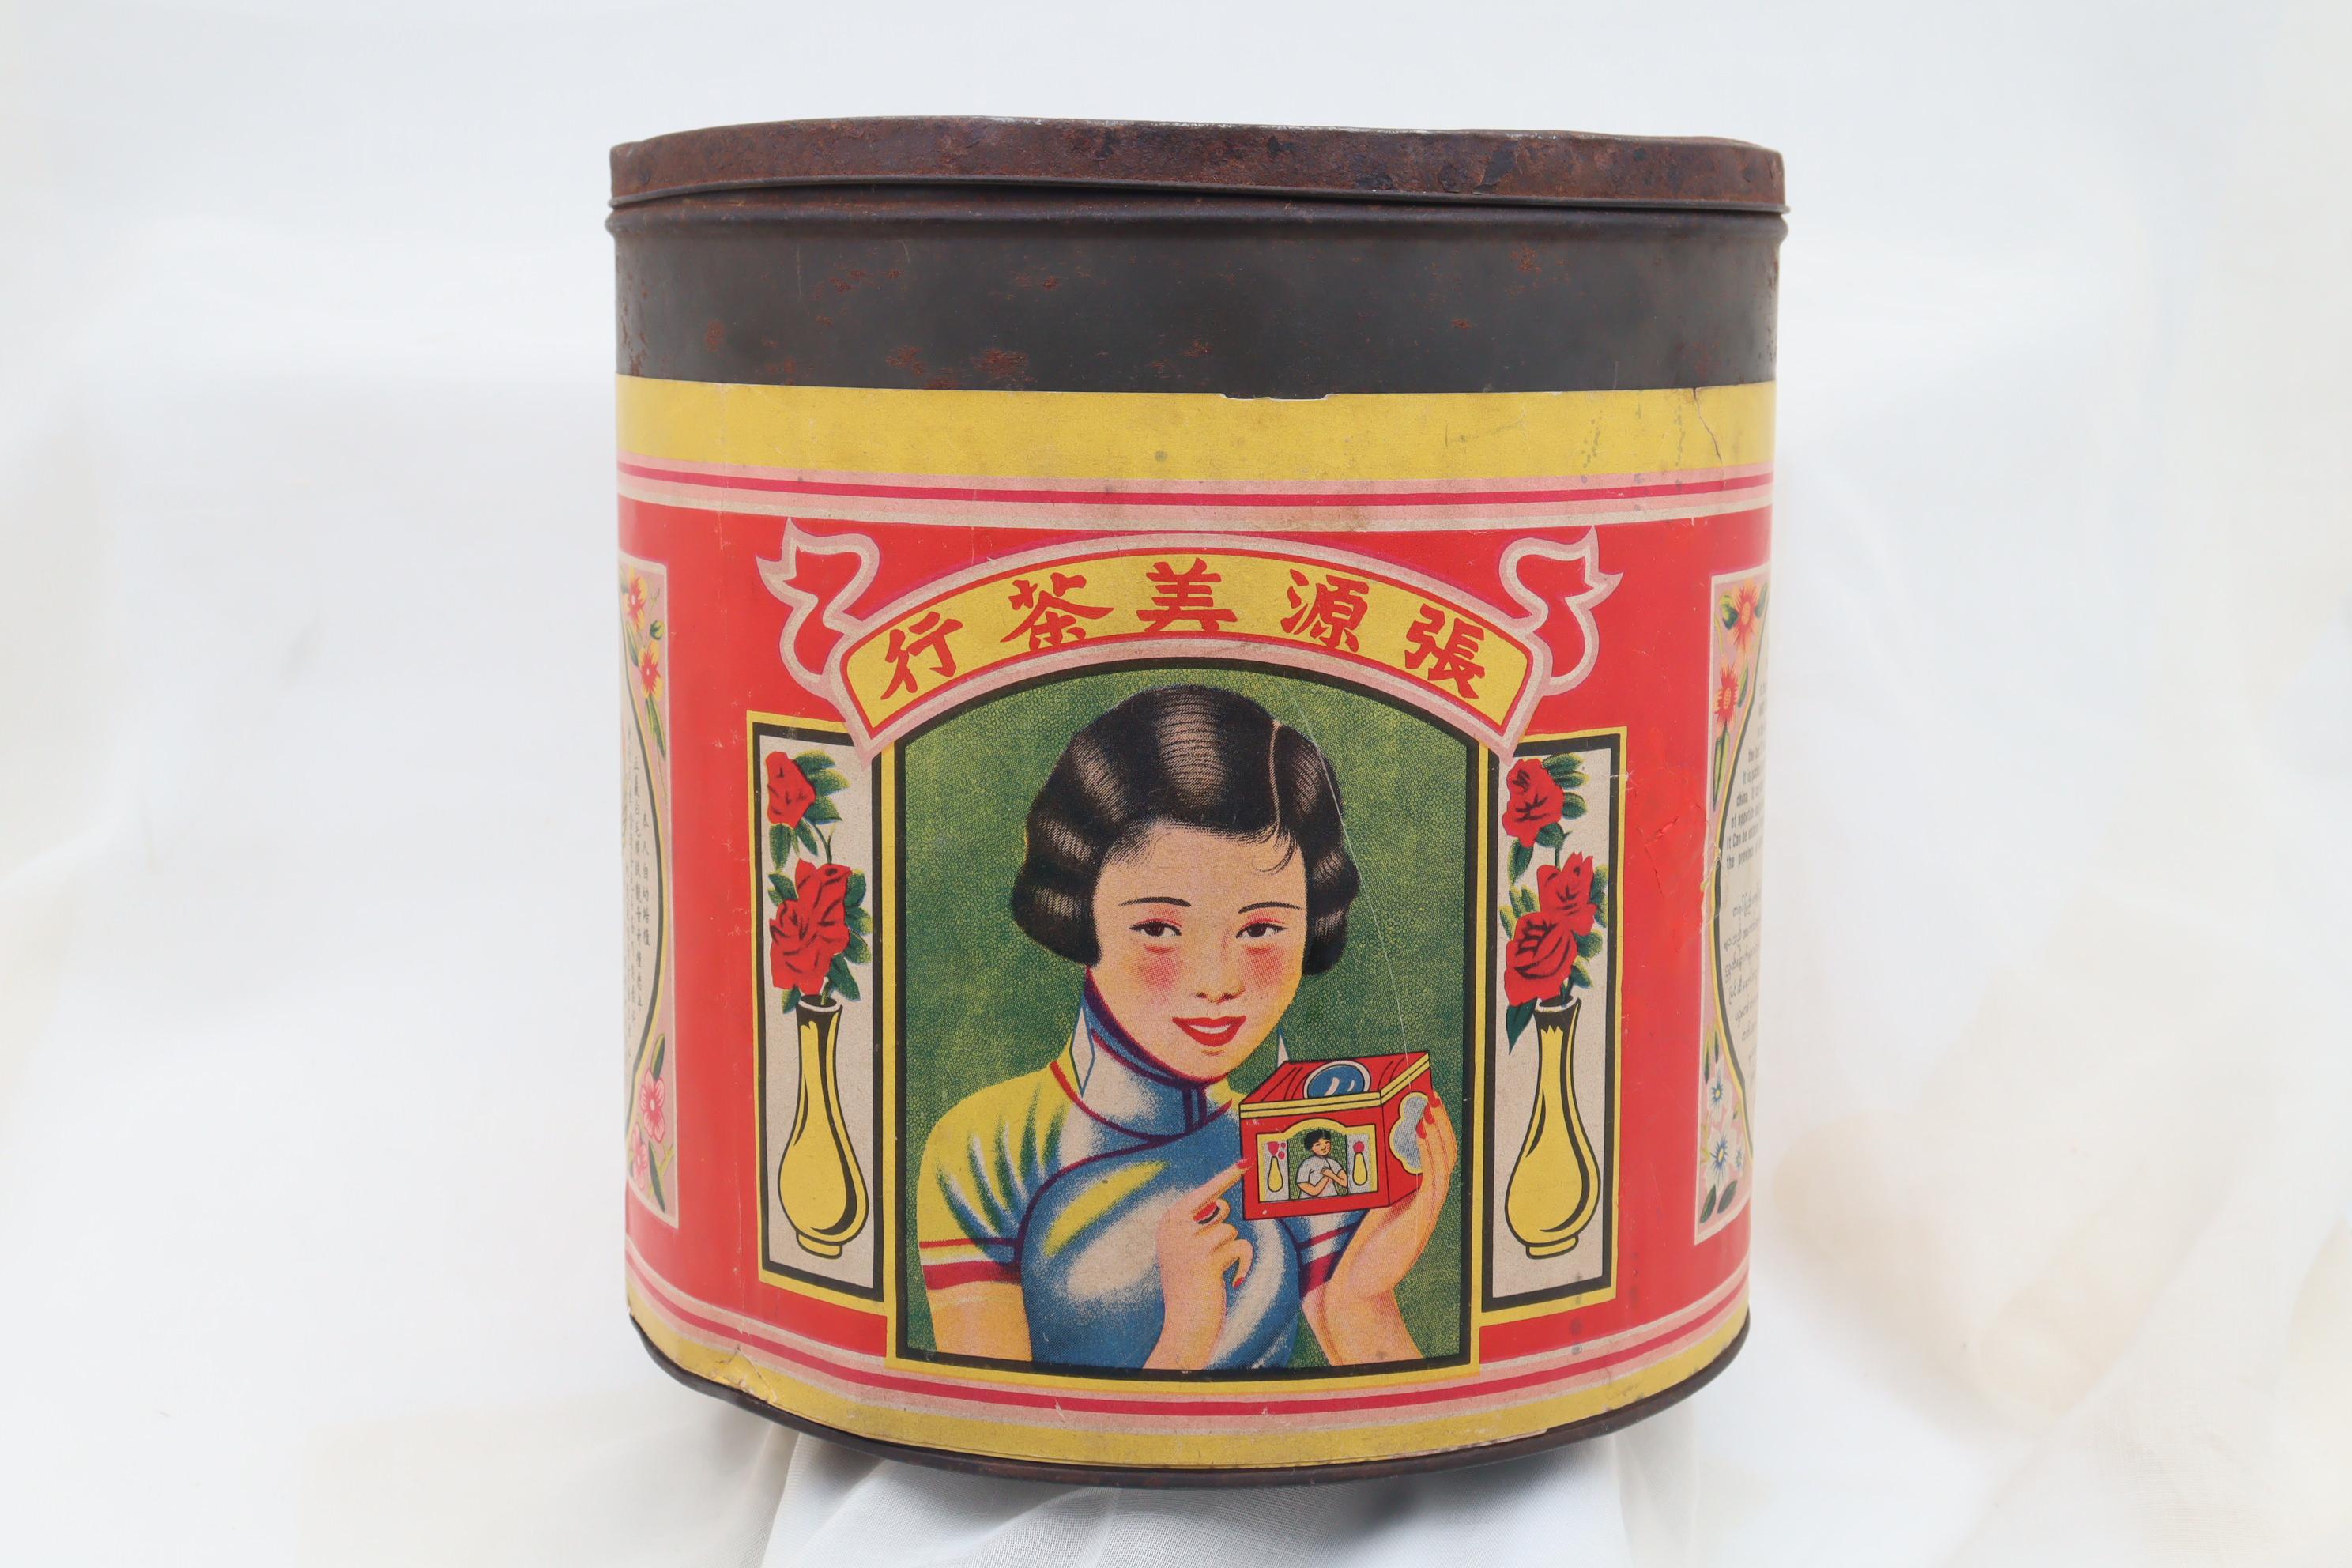 This very decorative tea tin was made for the Burmese market with text in Chinese, English and Burmese. It was shipped from Amoy (now Xiamem) in China to be sold in the retail store in Rangoon (now Yangon). It appears to have lost the paper label to